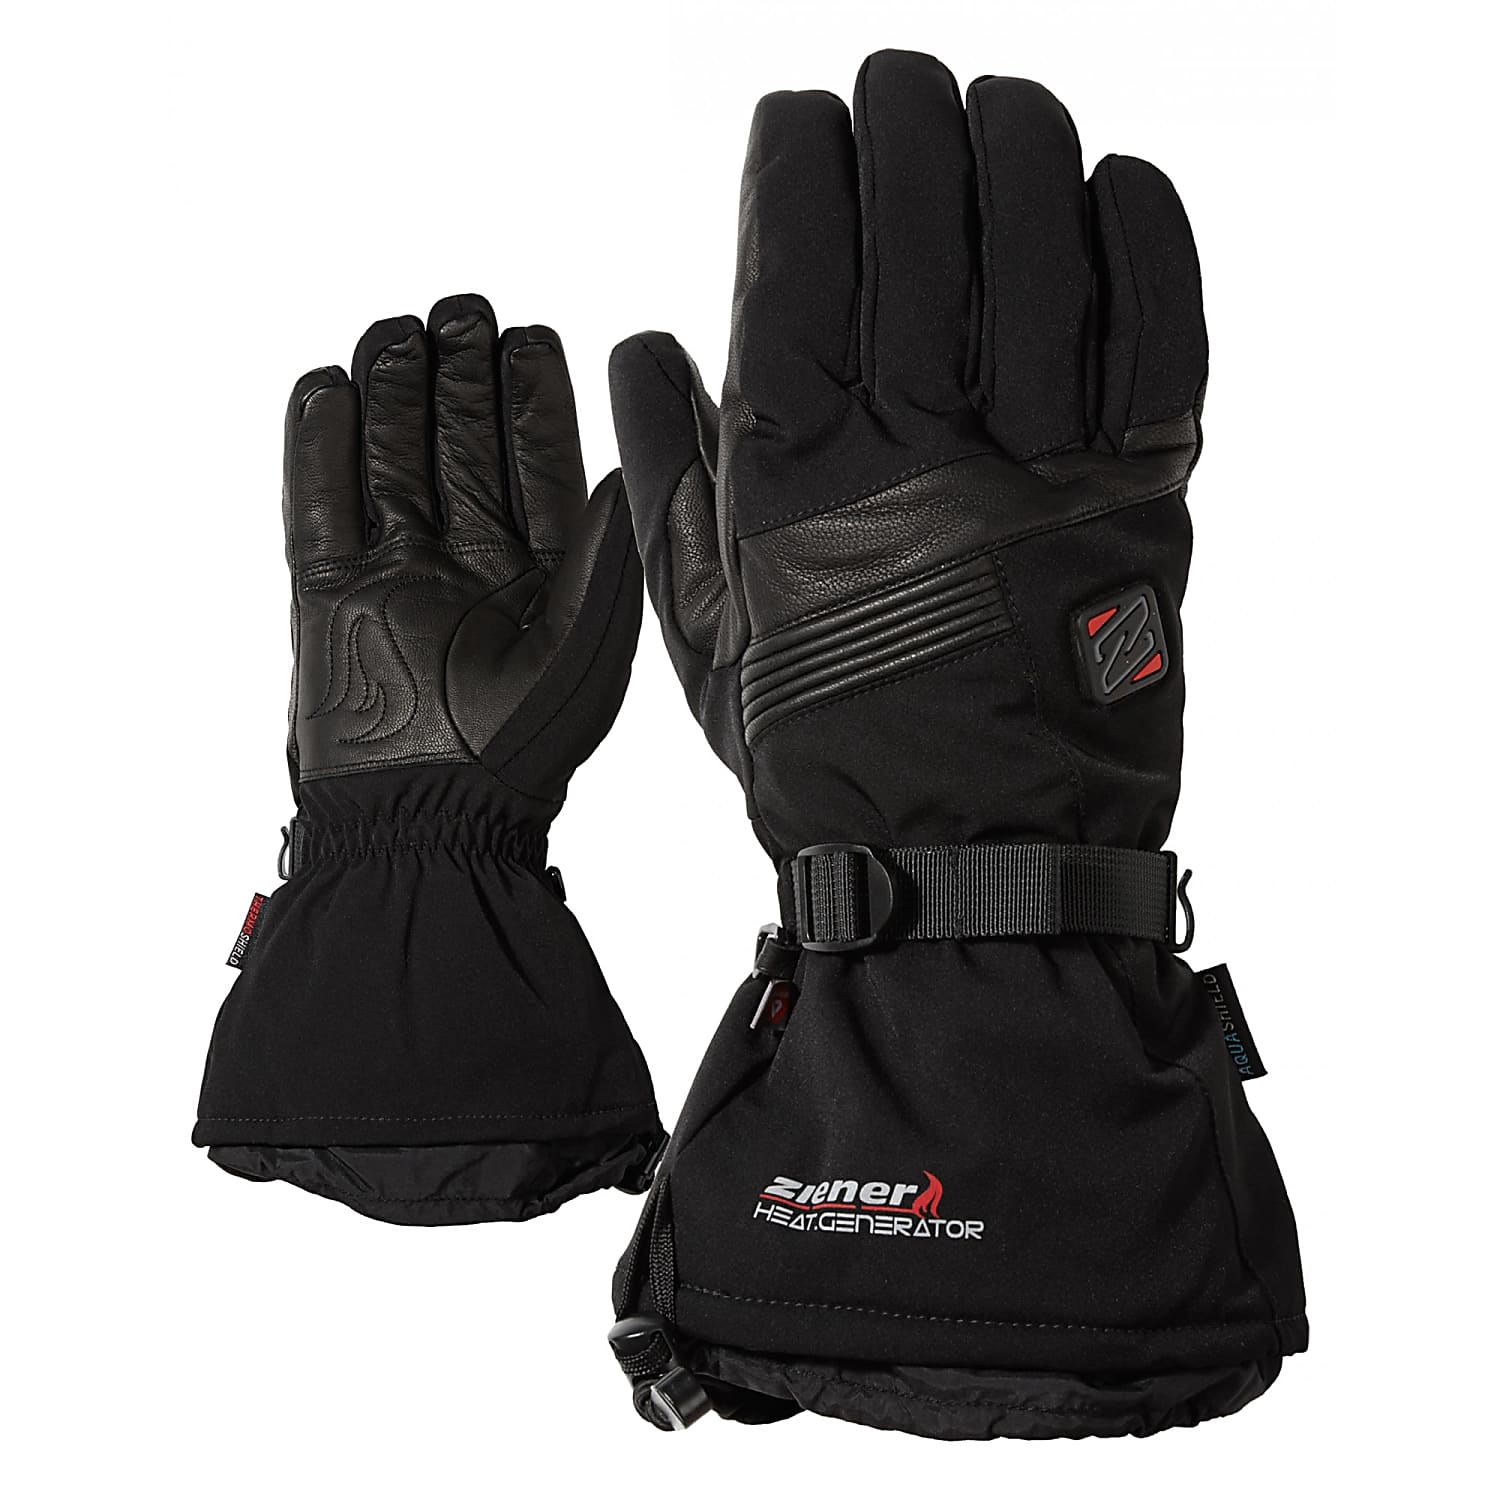 middag Bot Onvermijdelijk Ziener M GERMO AS PR HOT GLOVE, Black - Fast and cheap shipping -  www.exxpozed.com